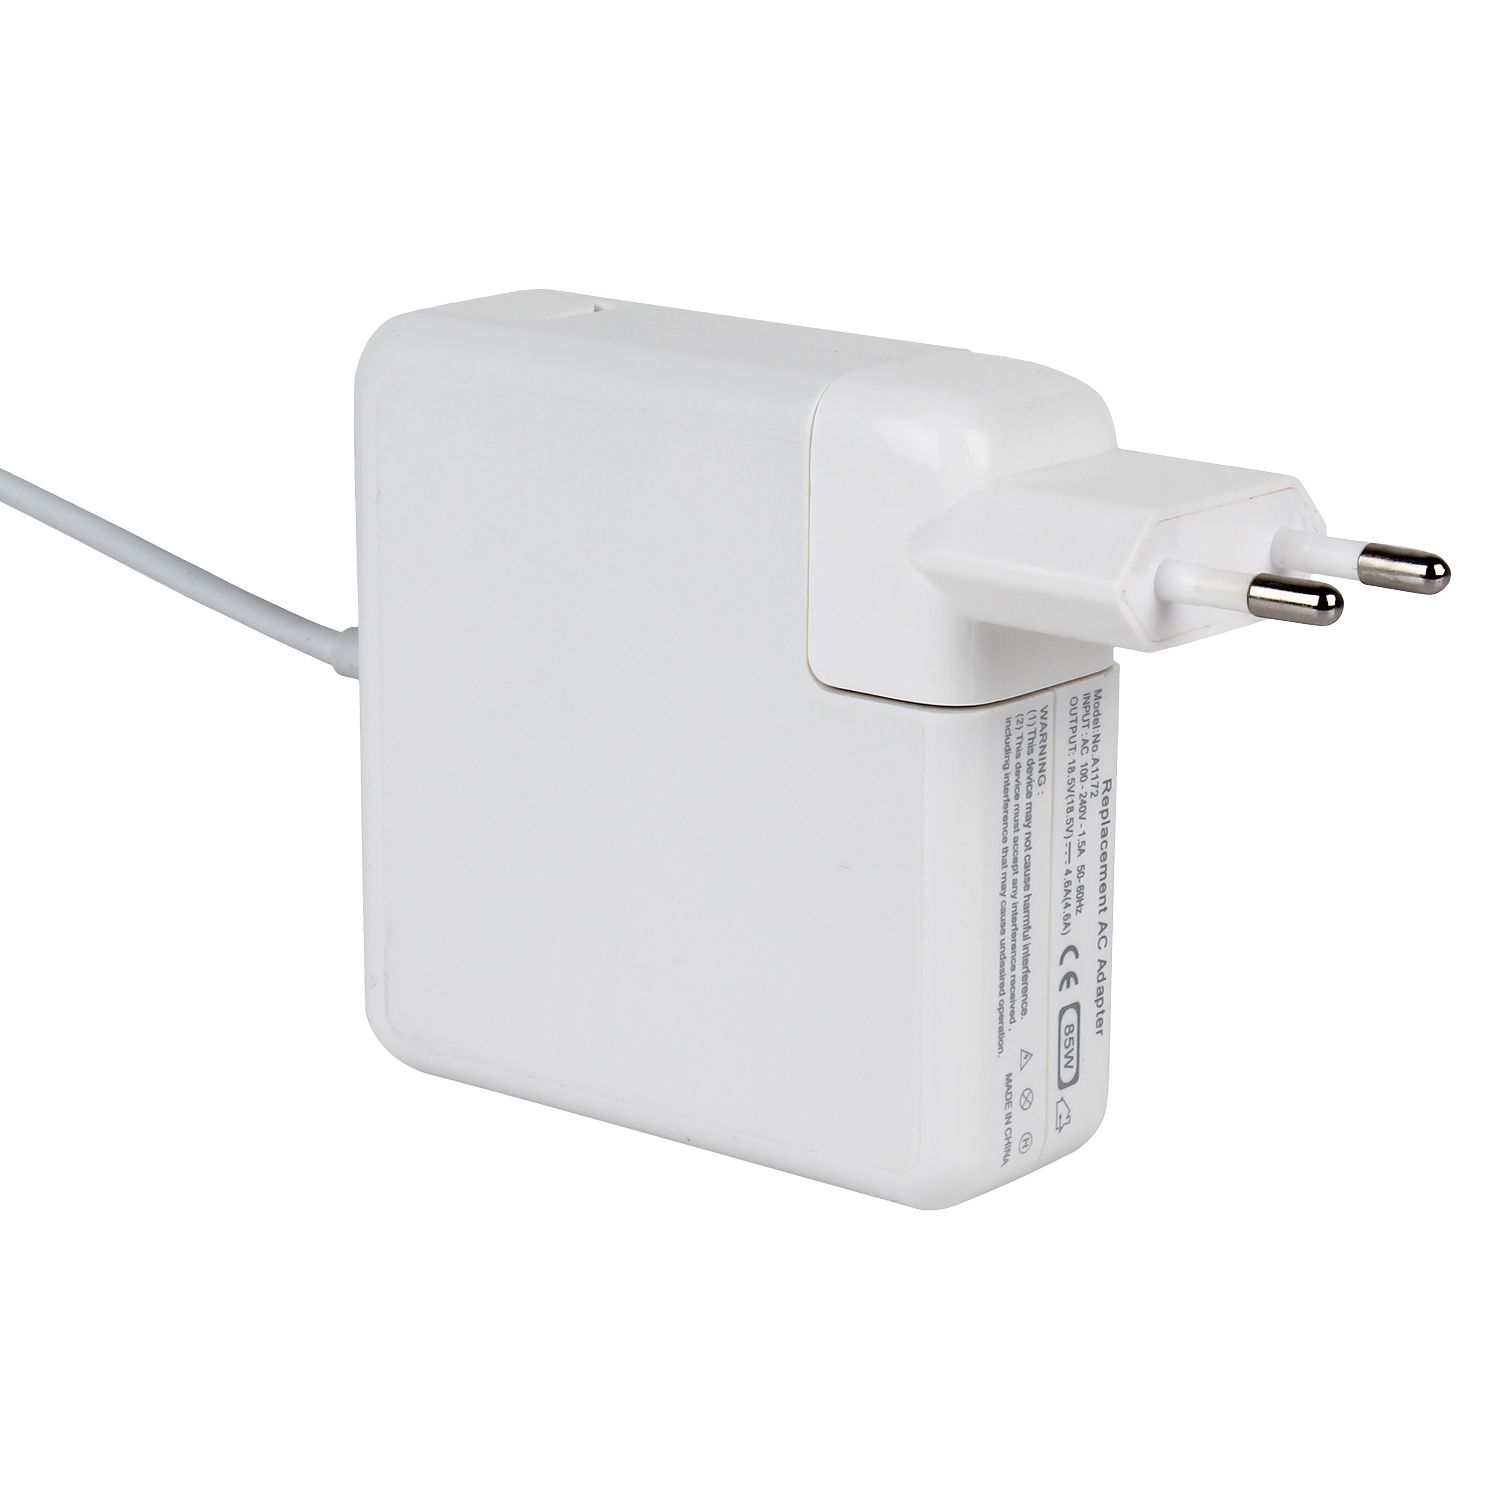 apple macbook charger price